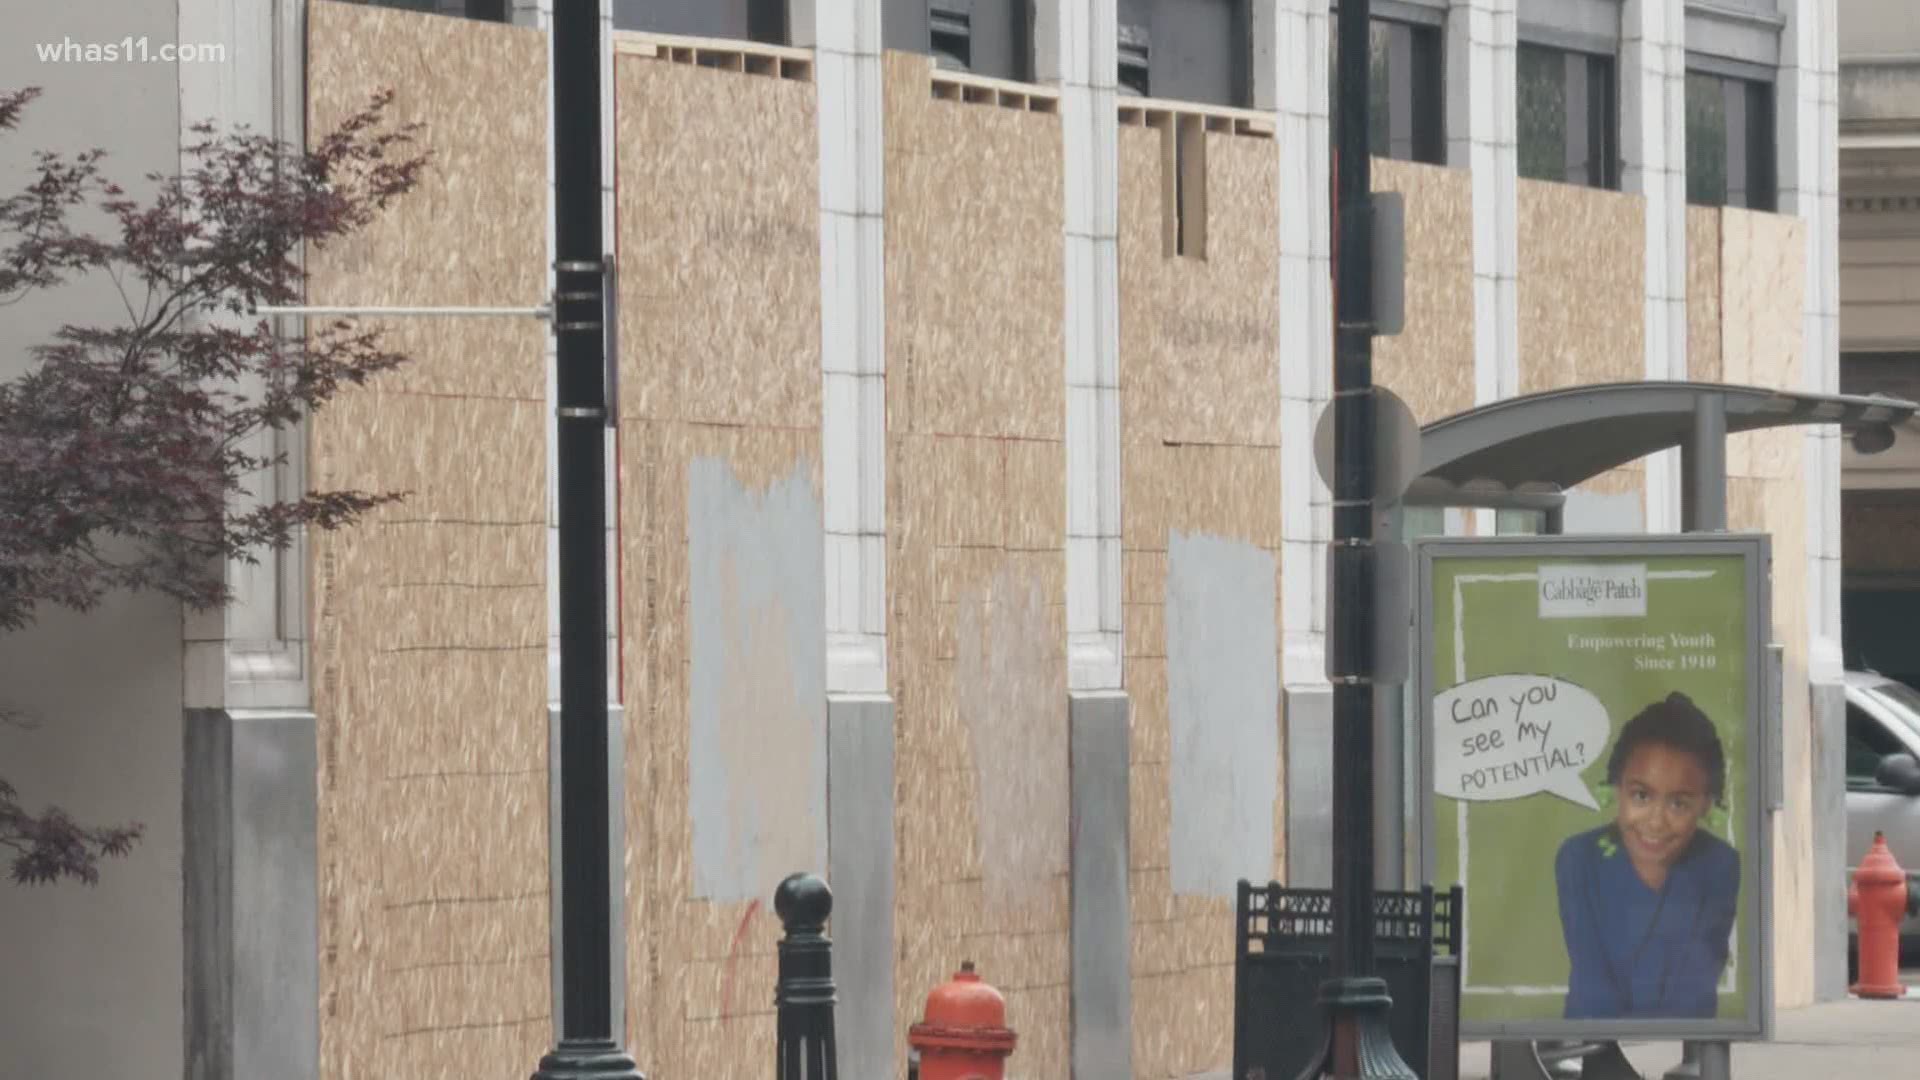 Business leaders will discuss how to reopen businesses along Main Street in downtown Louisville.